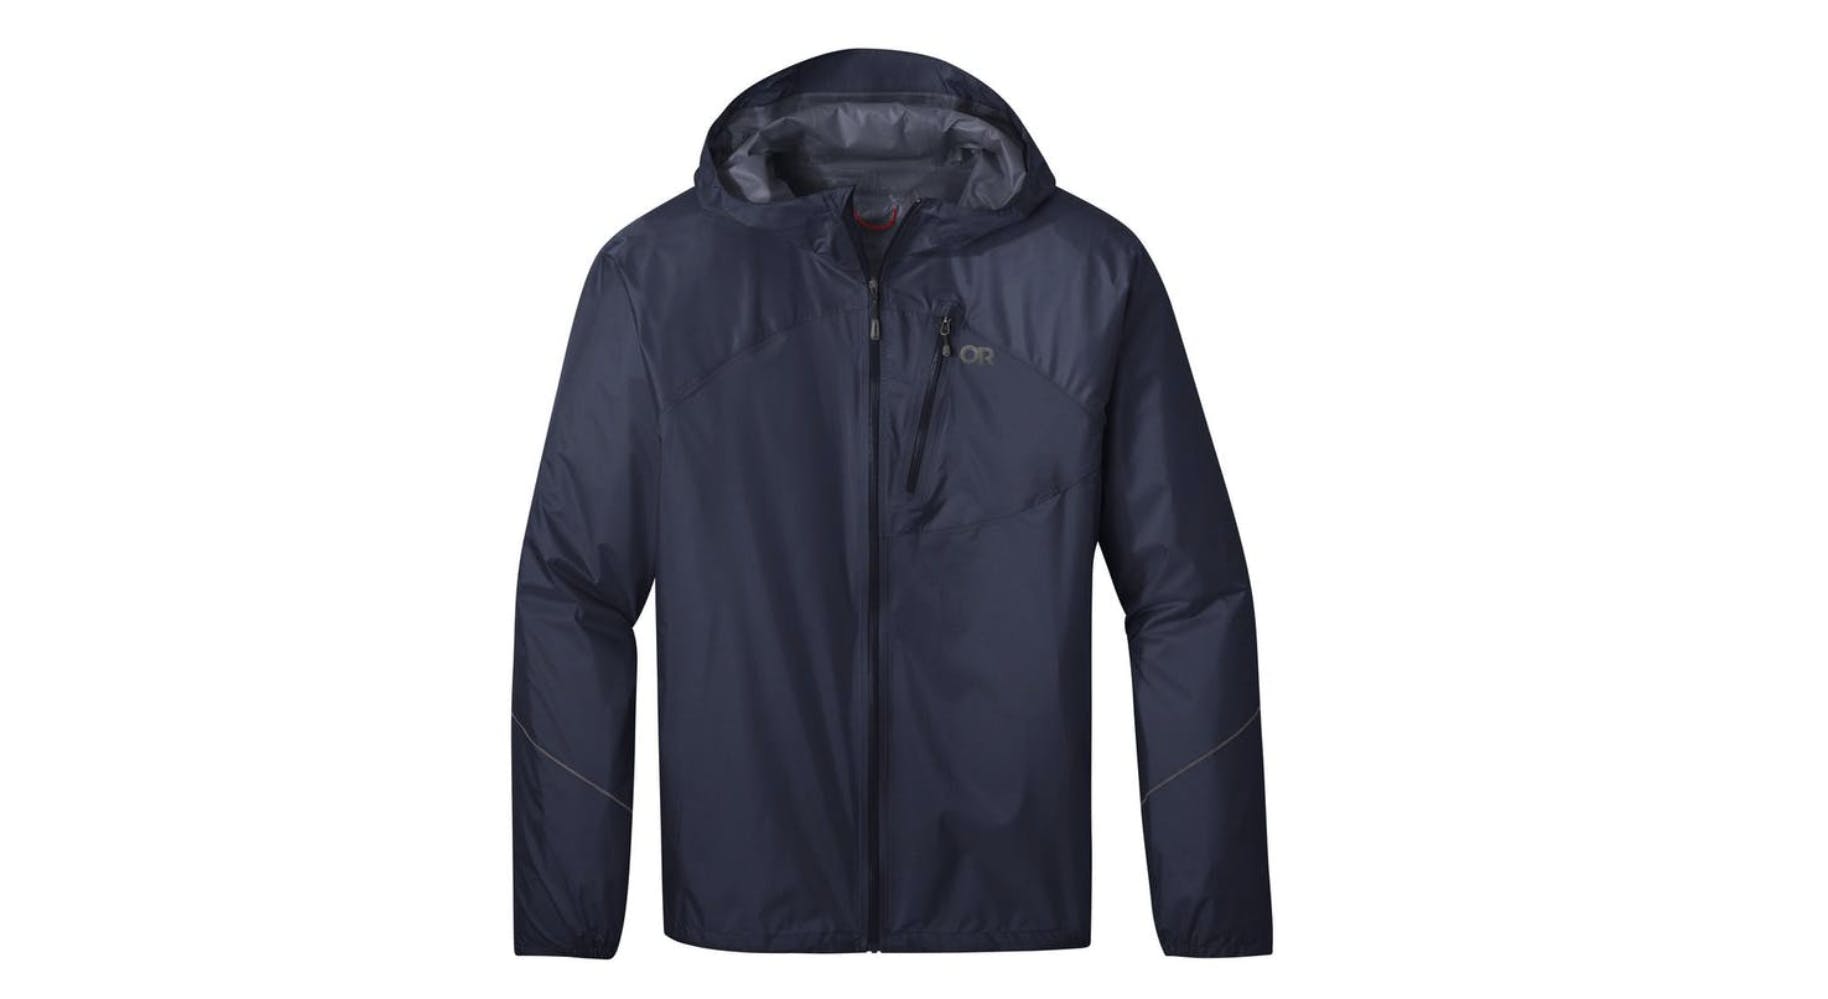 The Outdoor Research Helium Jacket in blue.